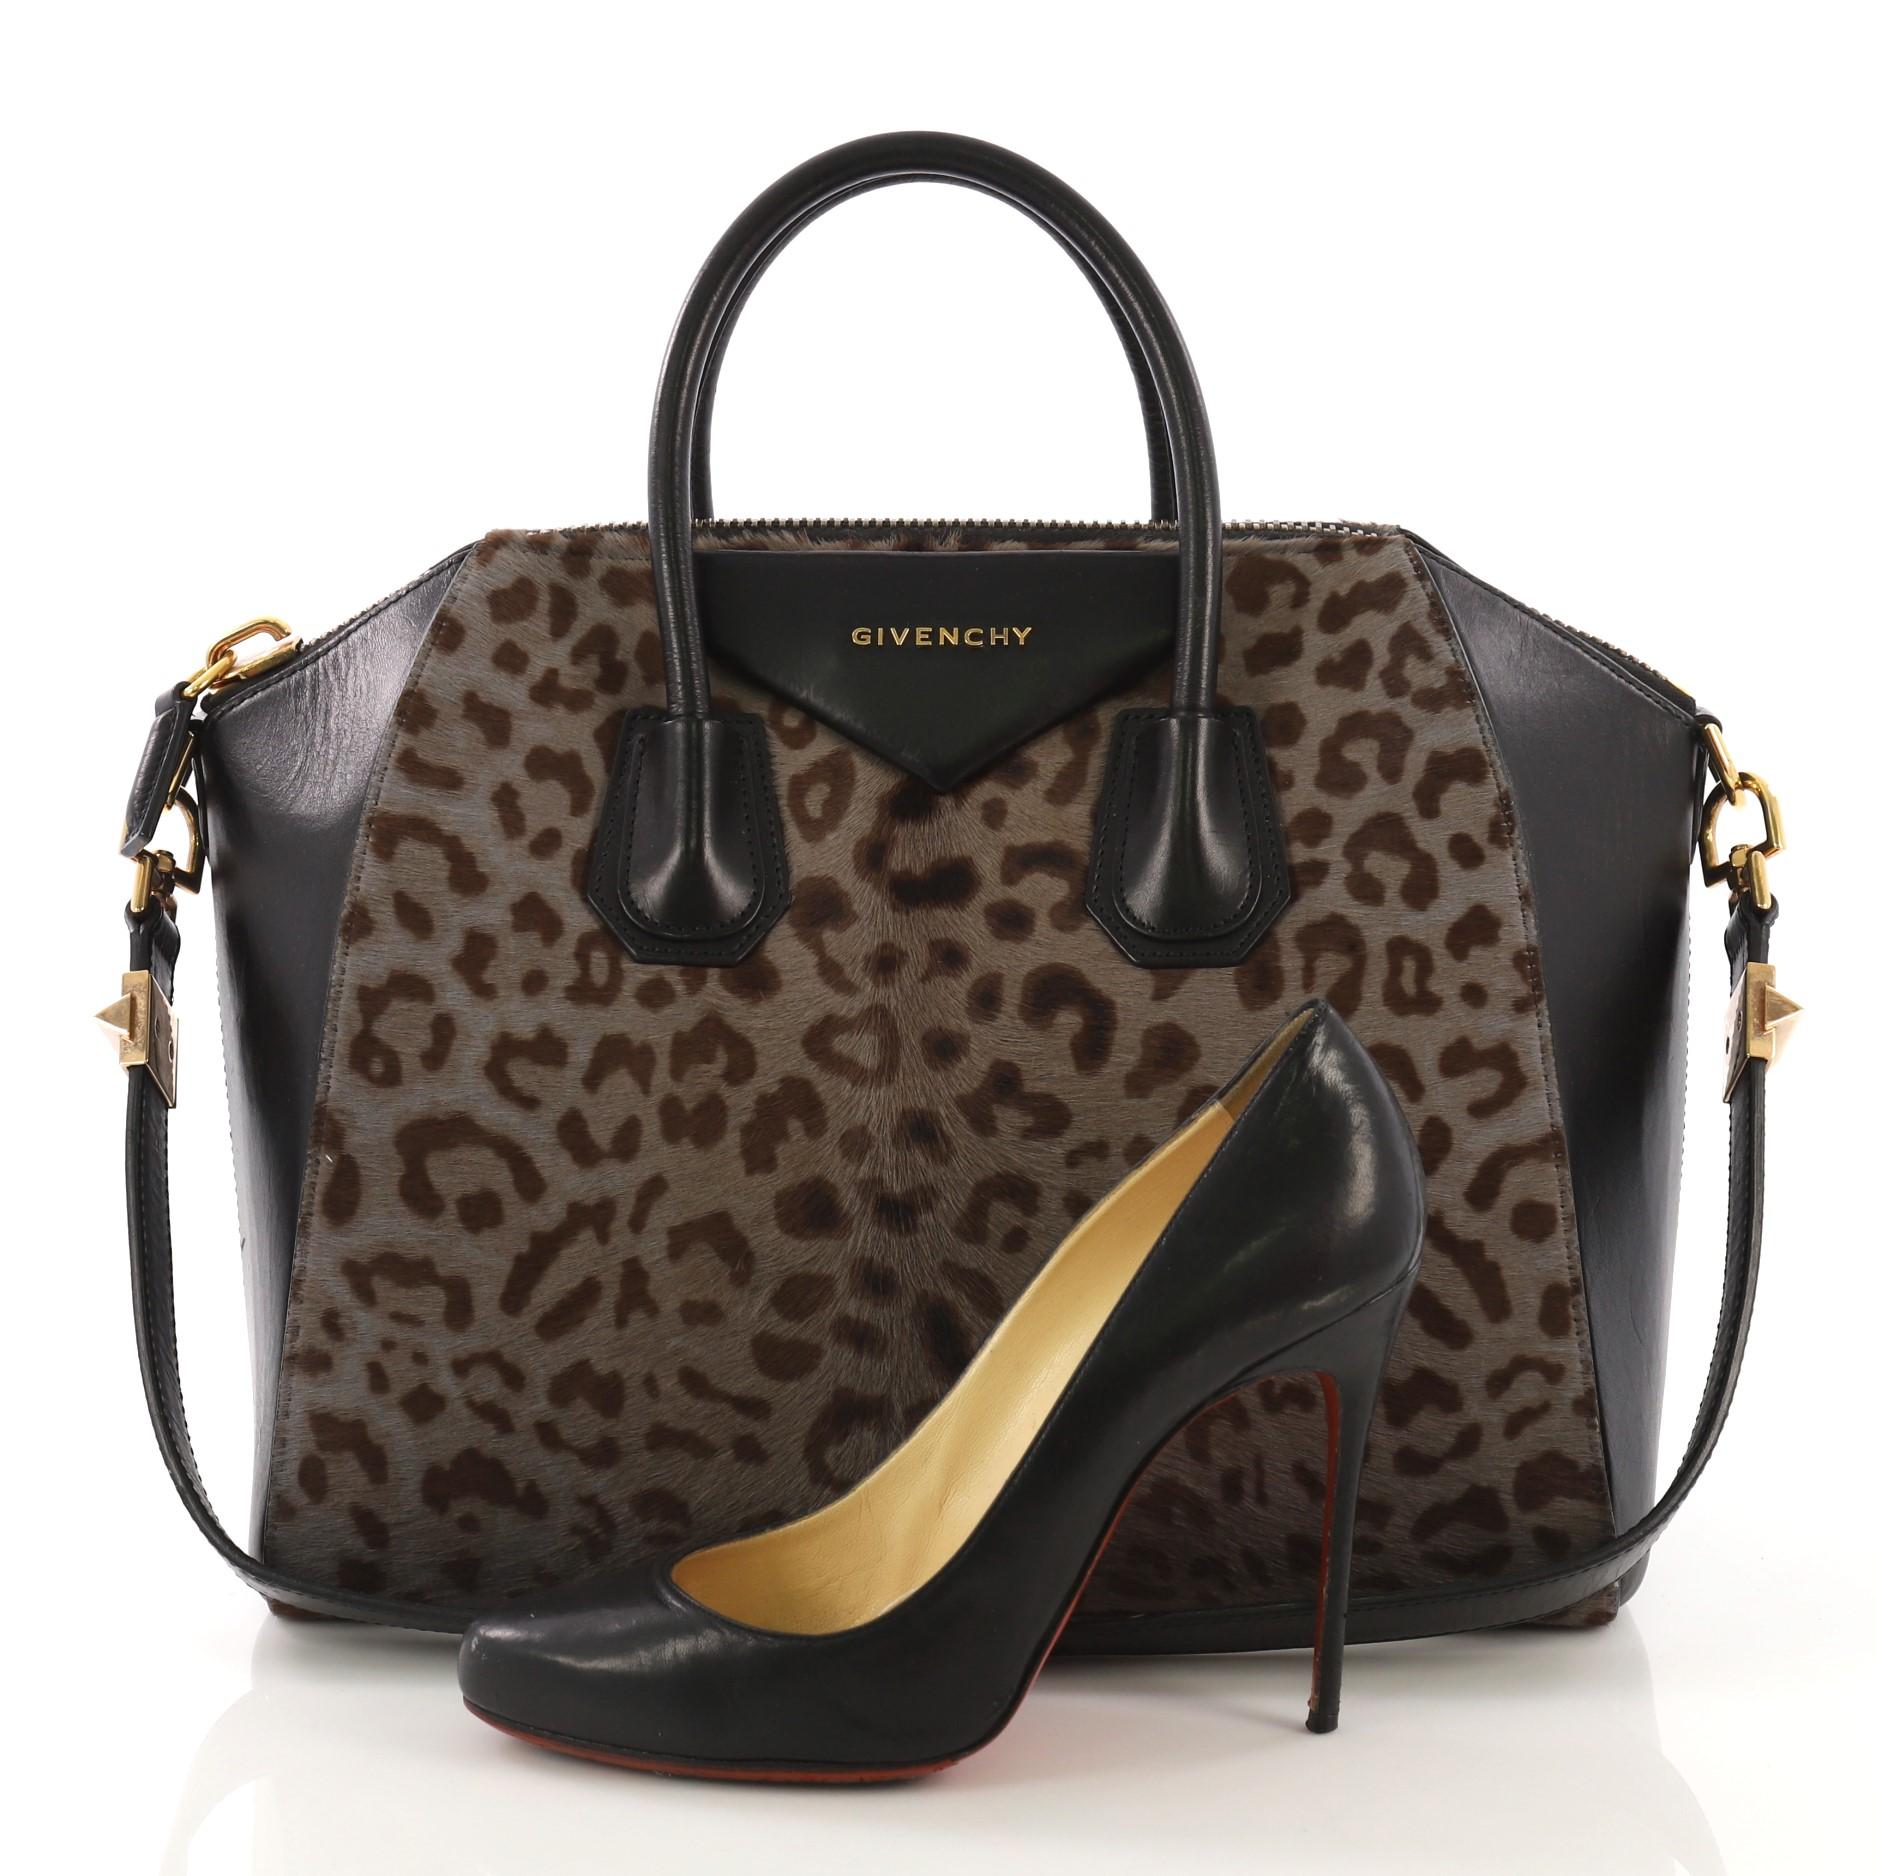 This Givenchy Antigona Bag Pony Hair Medium, crafted from brown pony hair, features dual rolled leather handles and gold-tone hardware. Its zip around closure opens to a black fabric interior with zip and slip pockets. **Note: Shoe photographed is